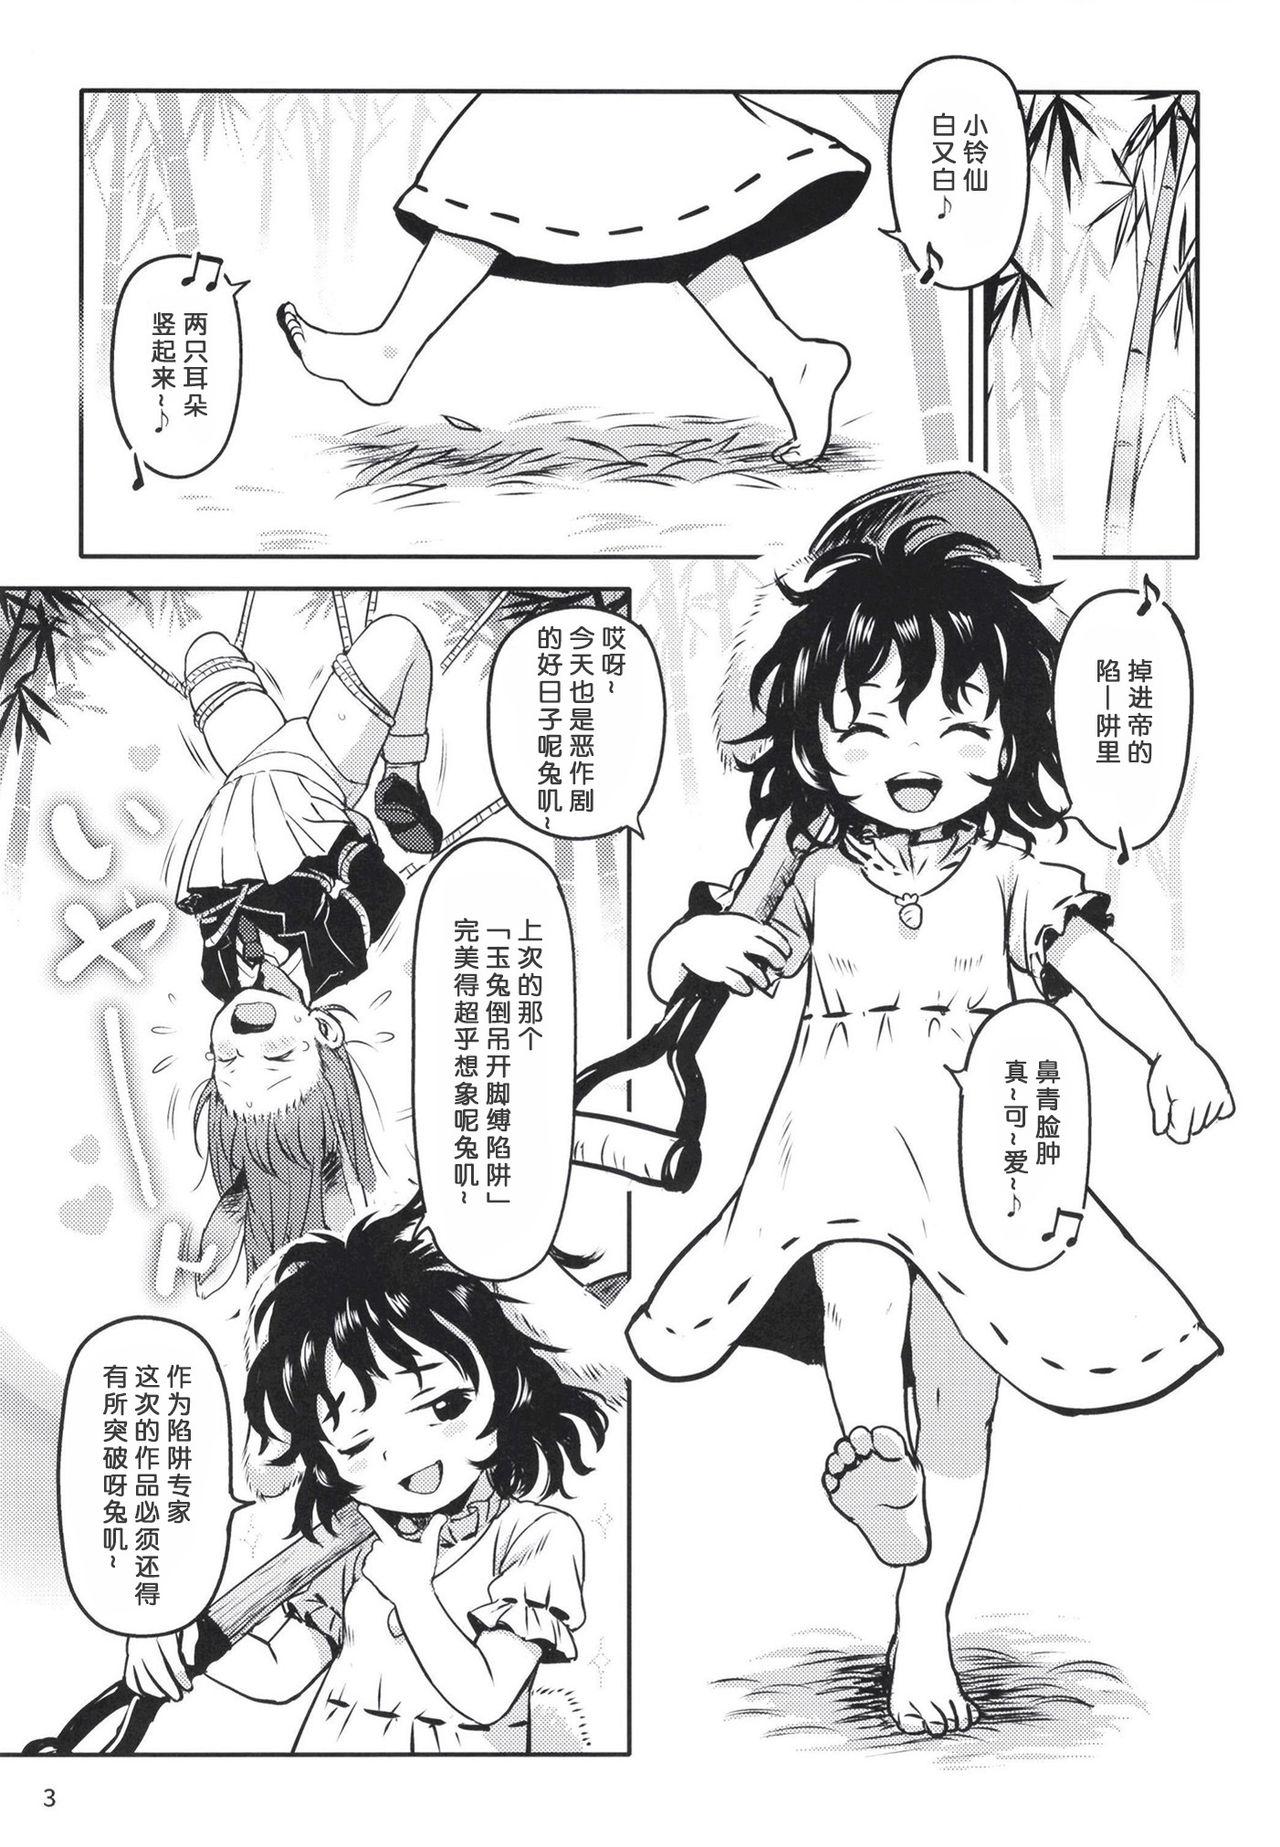 Gostosa Lucky Rabbit Tewi-chan! - Touhou project Screaming - Page 2